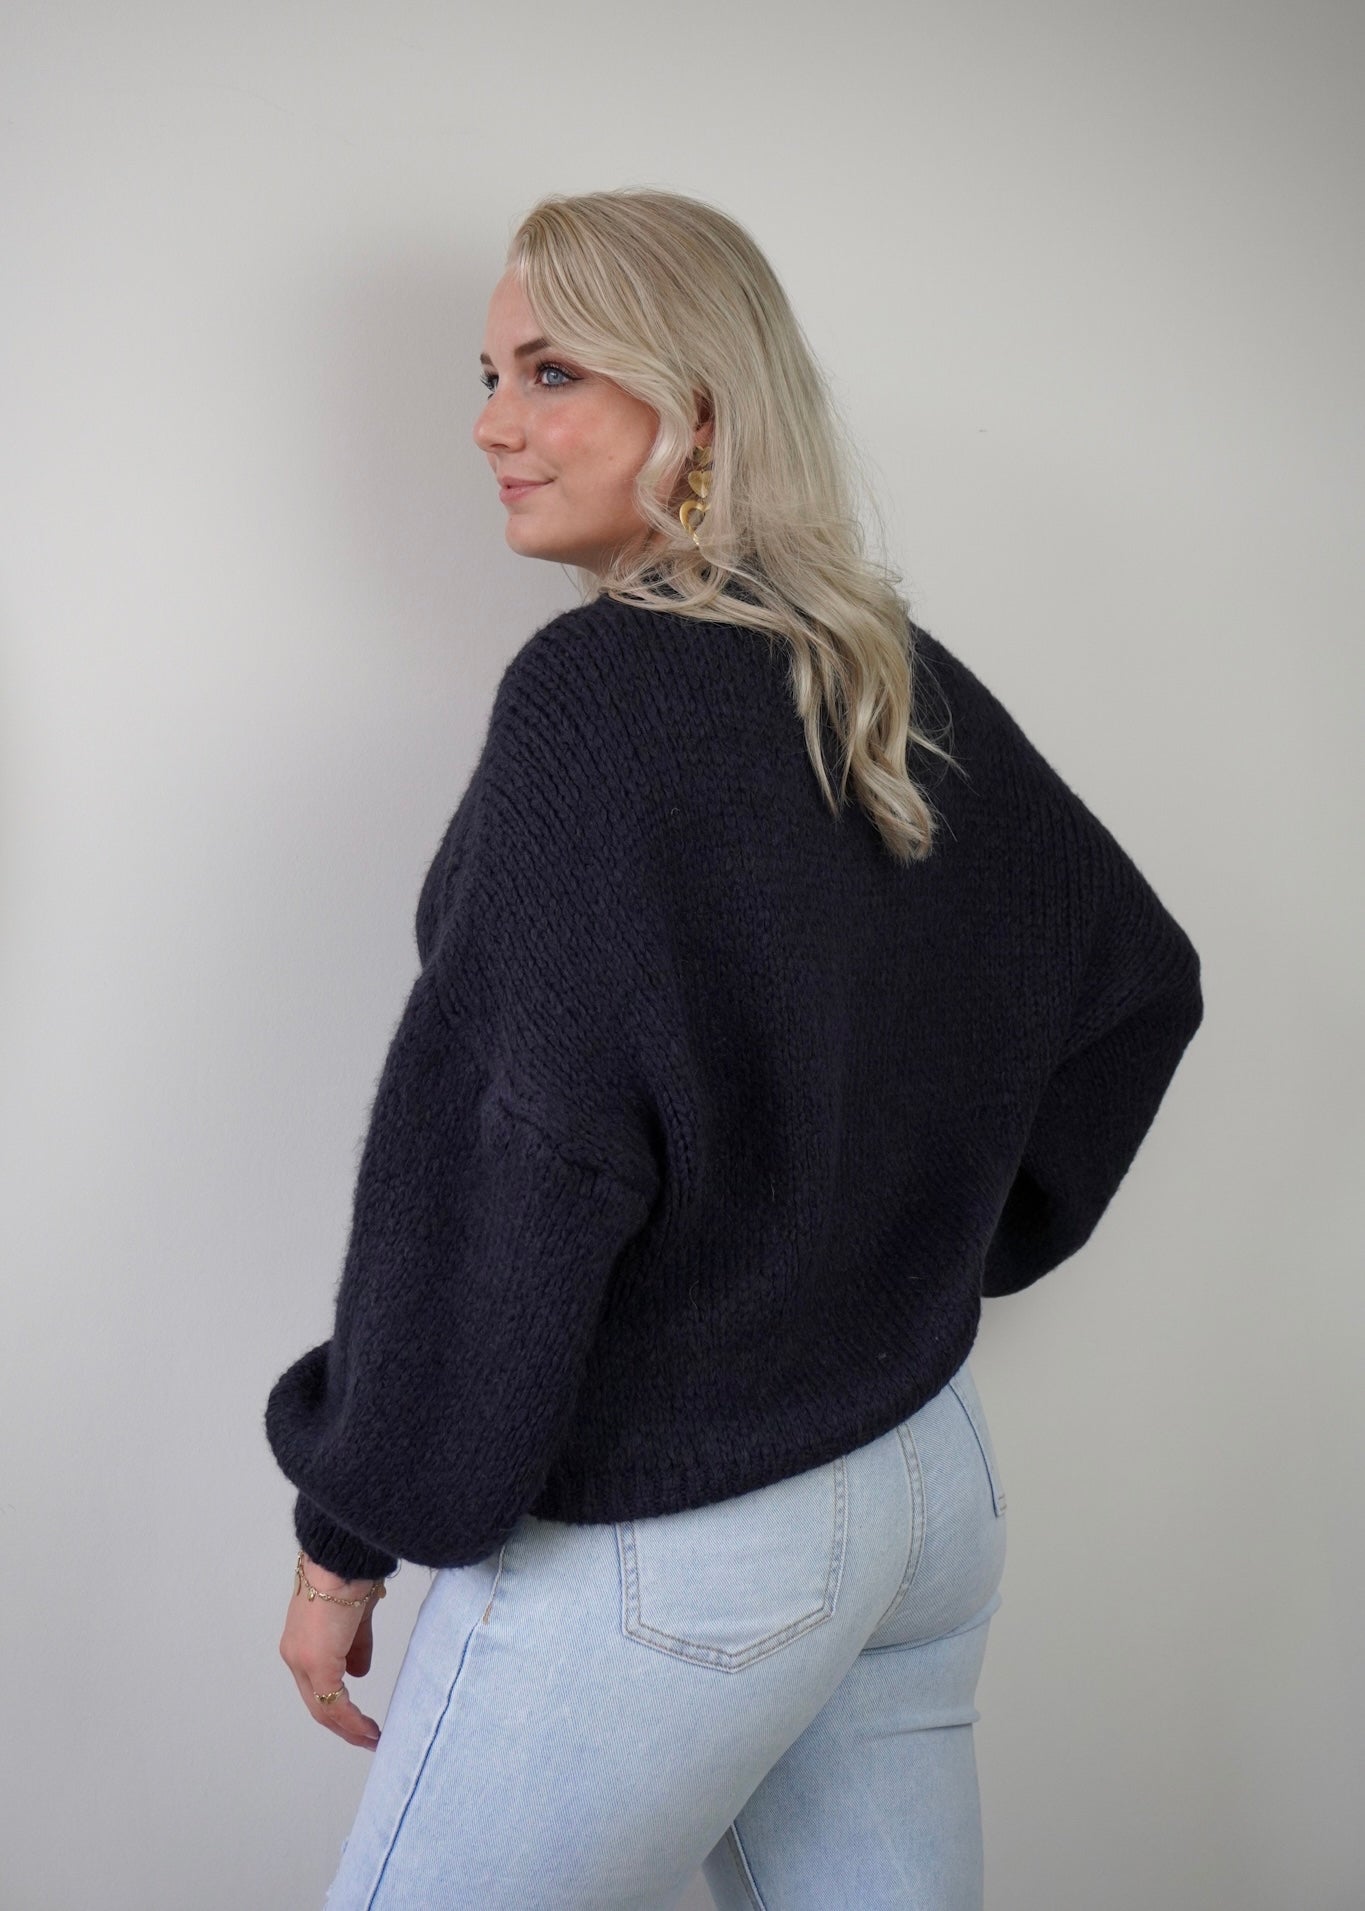 Jotti trui donkerblauw - Styles And More